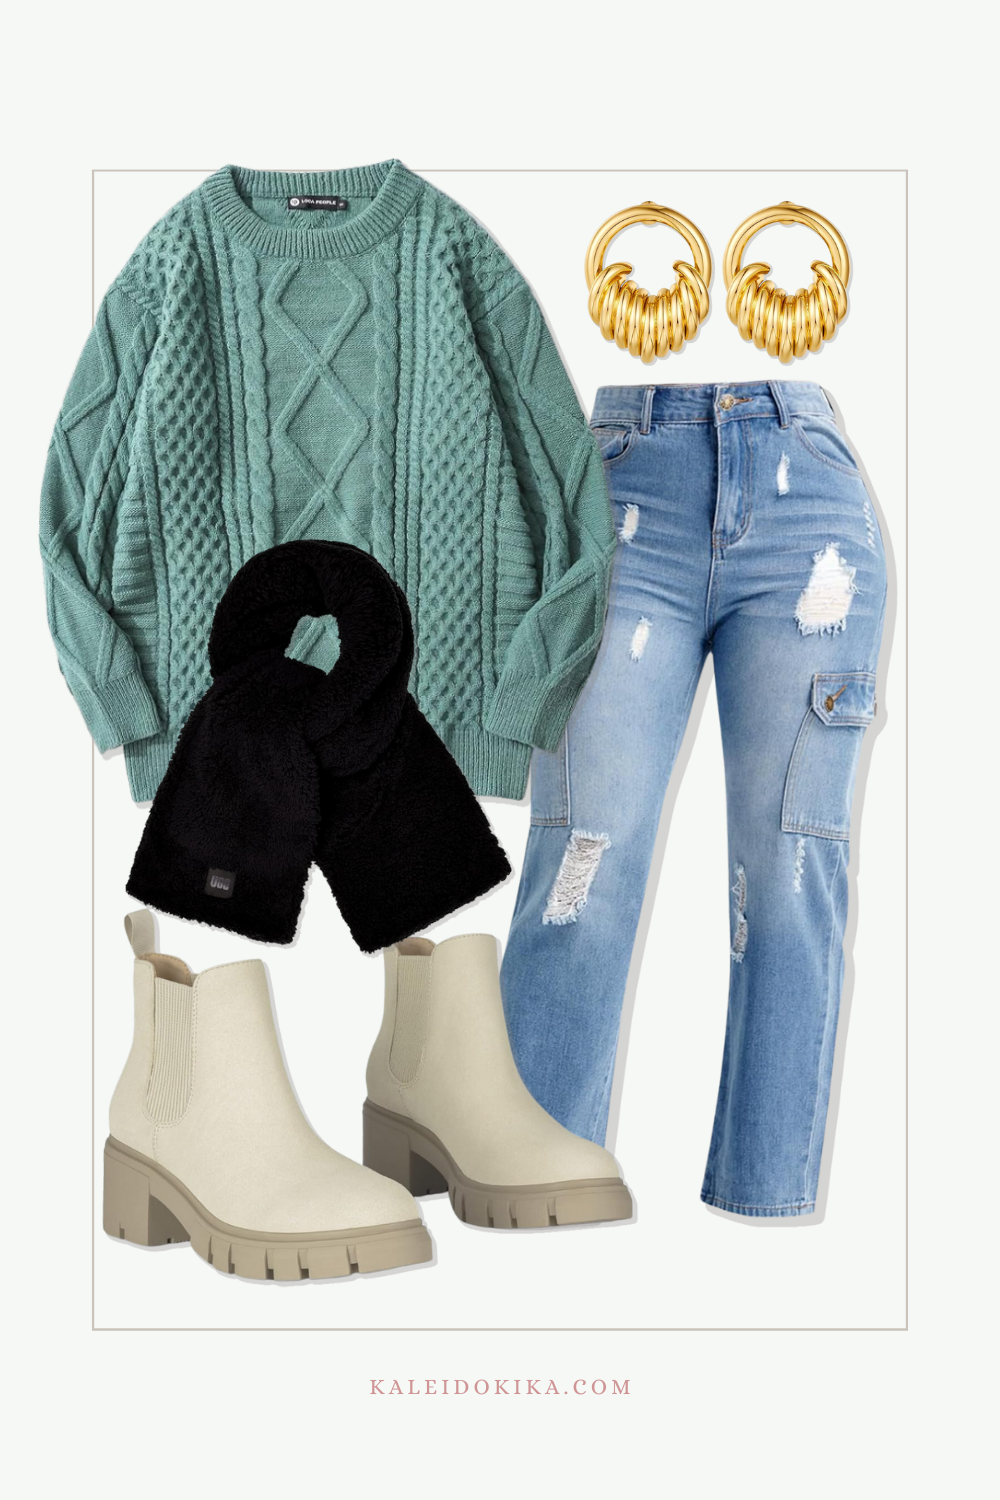 Outfit idea of casual chic style by pairing high-waisted distressed jeans with an oversized knit sweater, ankle boots and accessories